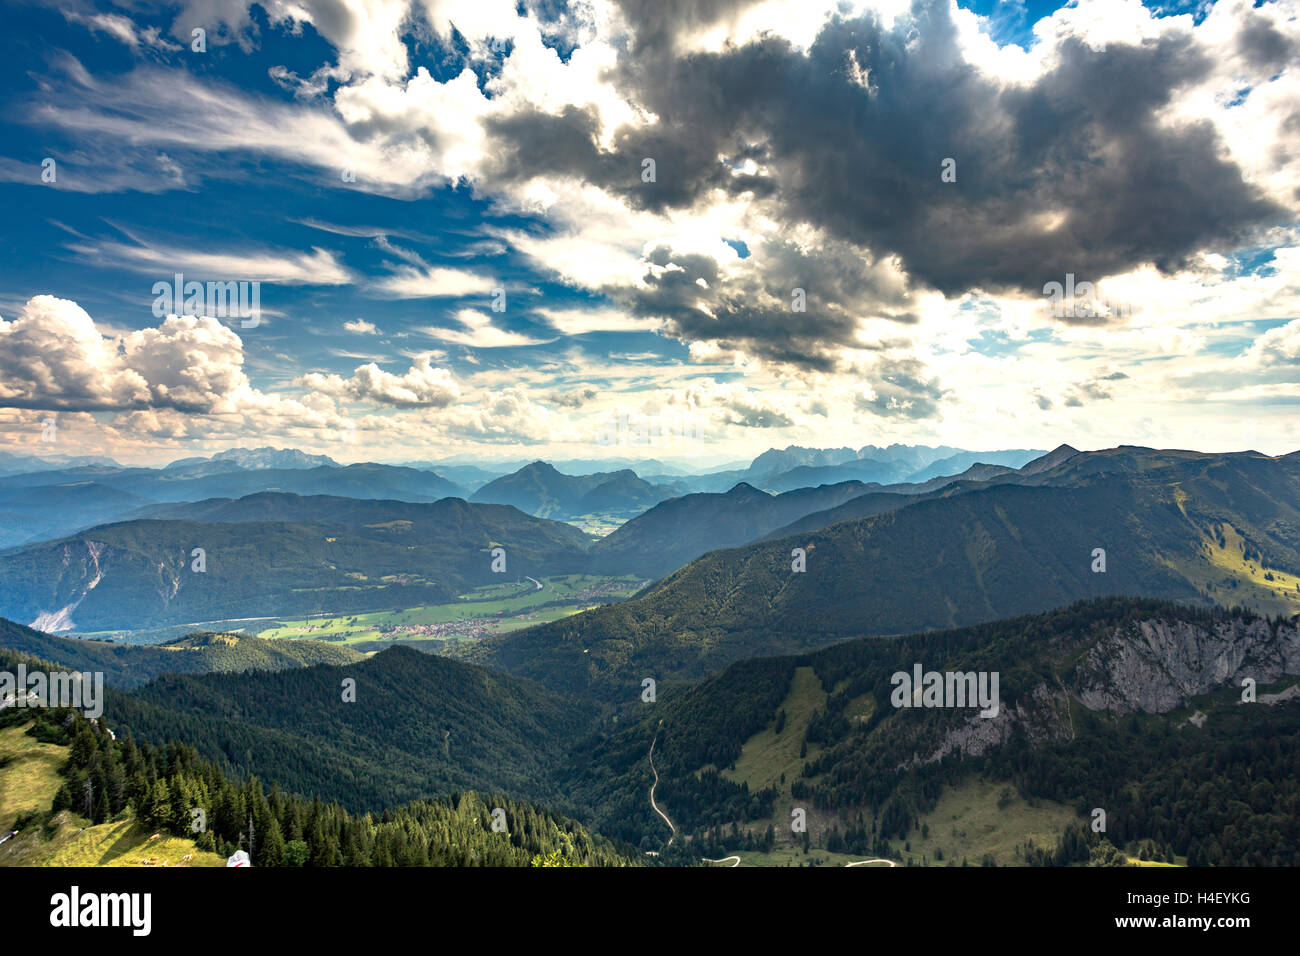 View from Kampenwand to Schlechinger Forestry and Schleching with Achental, Chiemgau Alps, Aschau, Bavaria, Germany Stock Photo